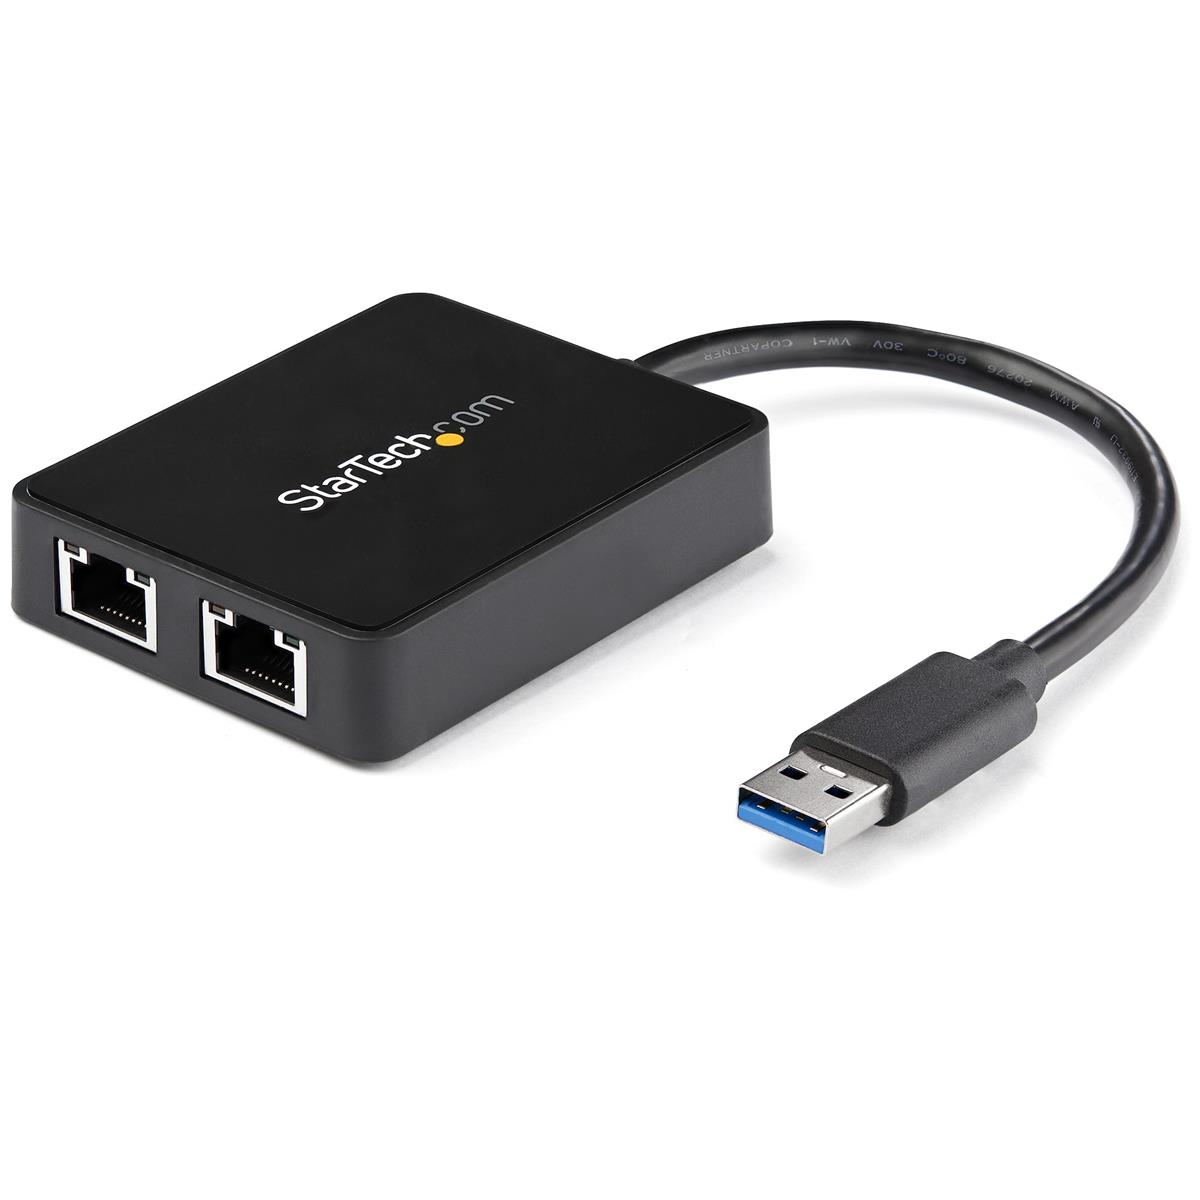 Image of StarTech USB 3.0 to Dual Port Gigabit Ethernet NIC Adapter with USB Port